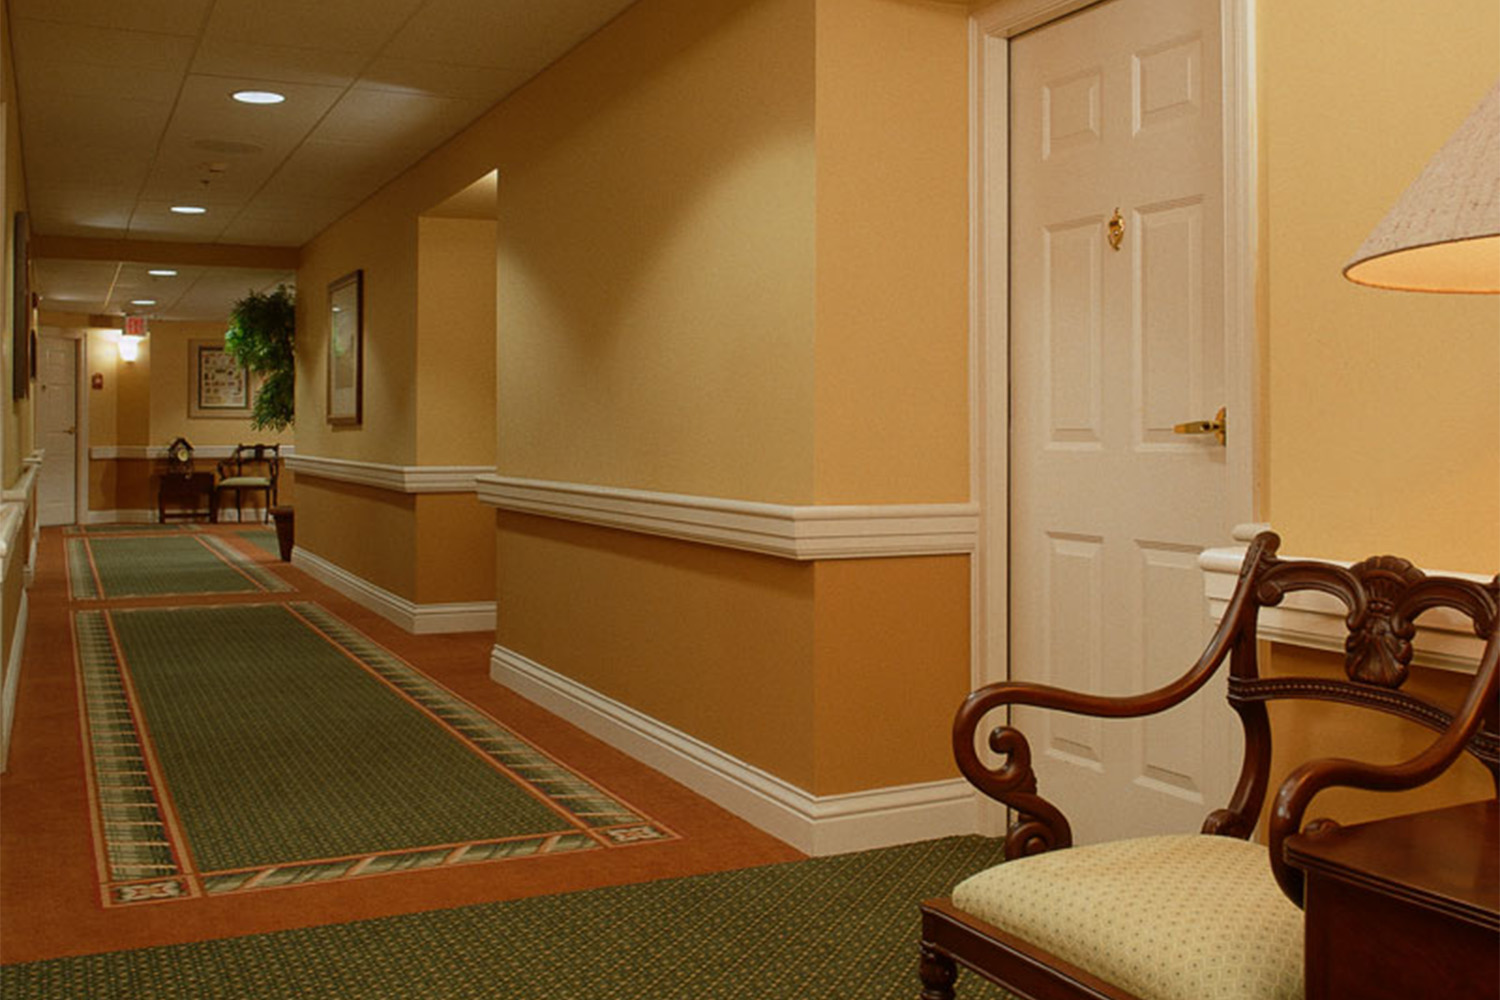 hallway area at the Riverview living facilities 